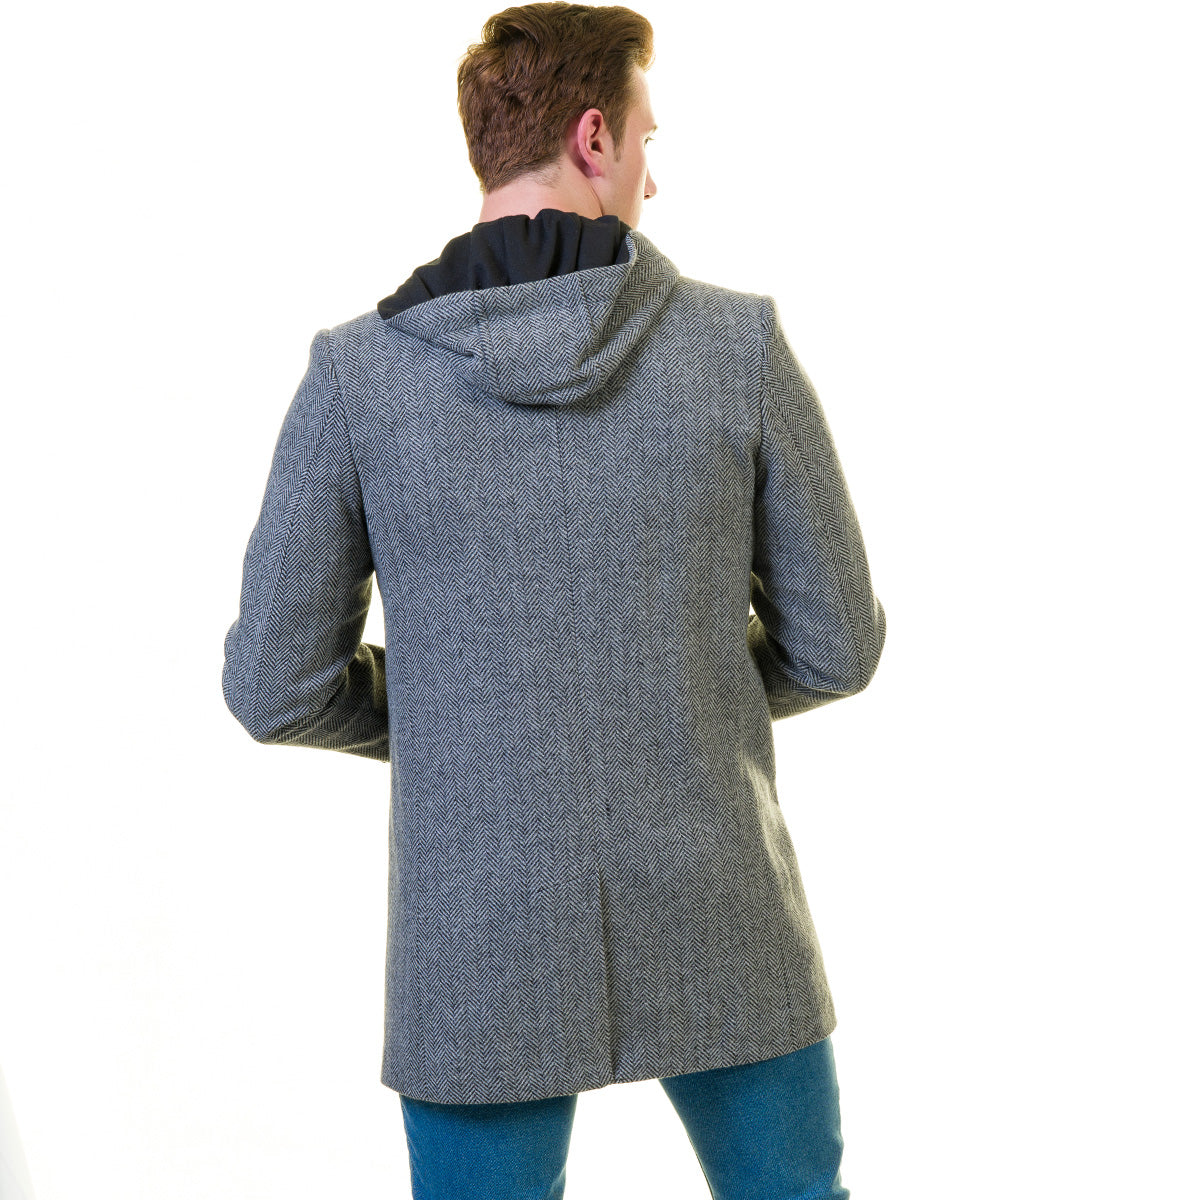 Men's European Grey Wool Coat Hooded Jacket Tailor fit Fine Luxury Quality Work and Casual